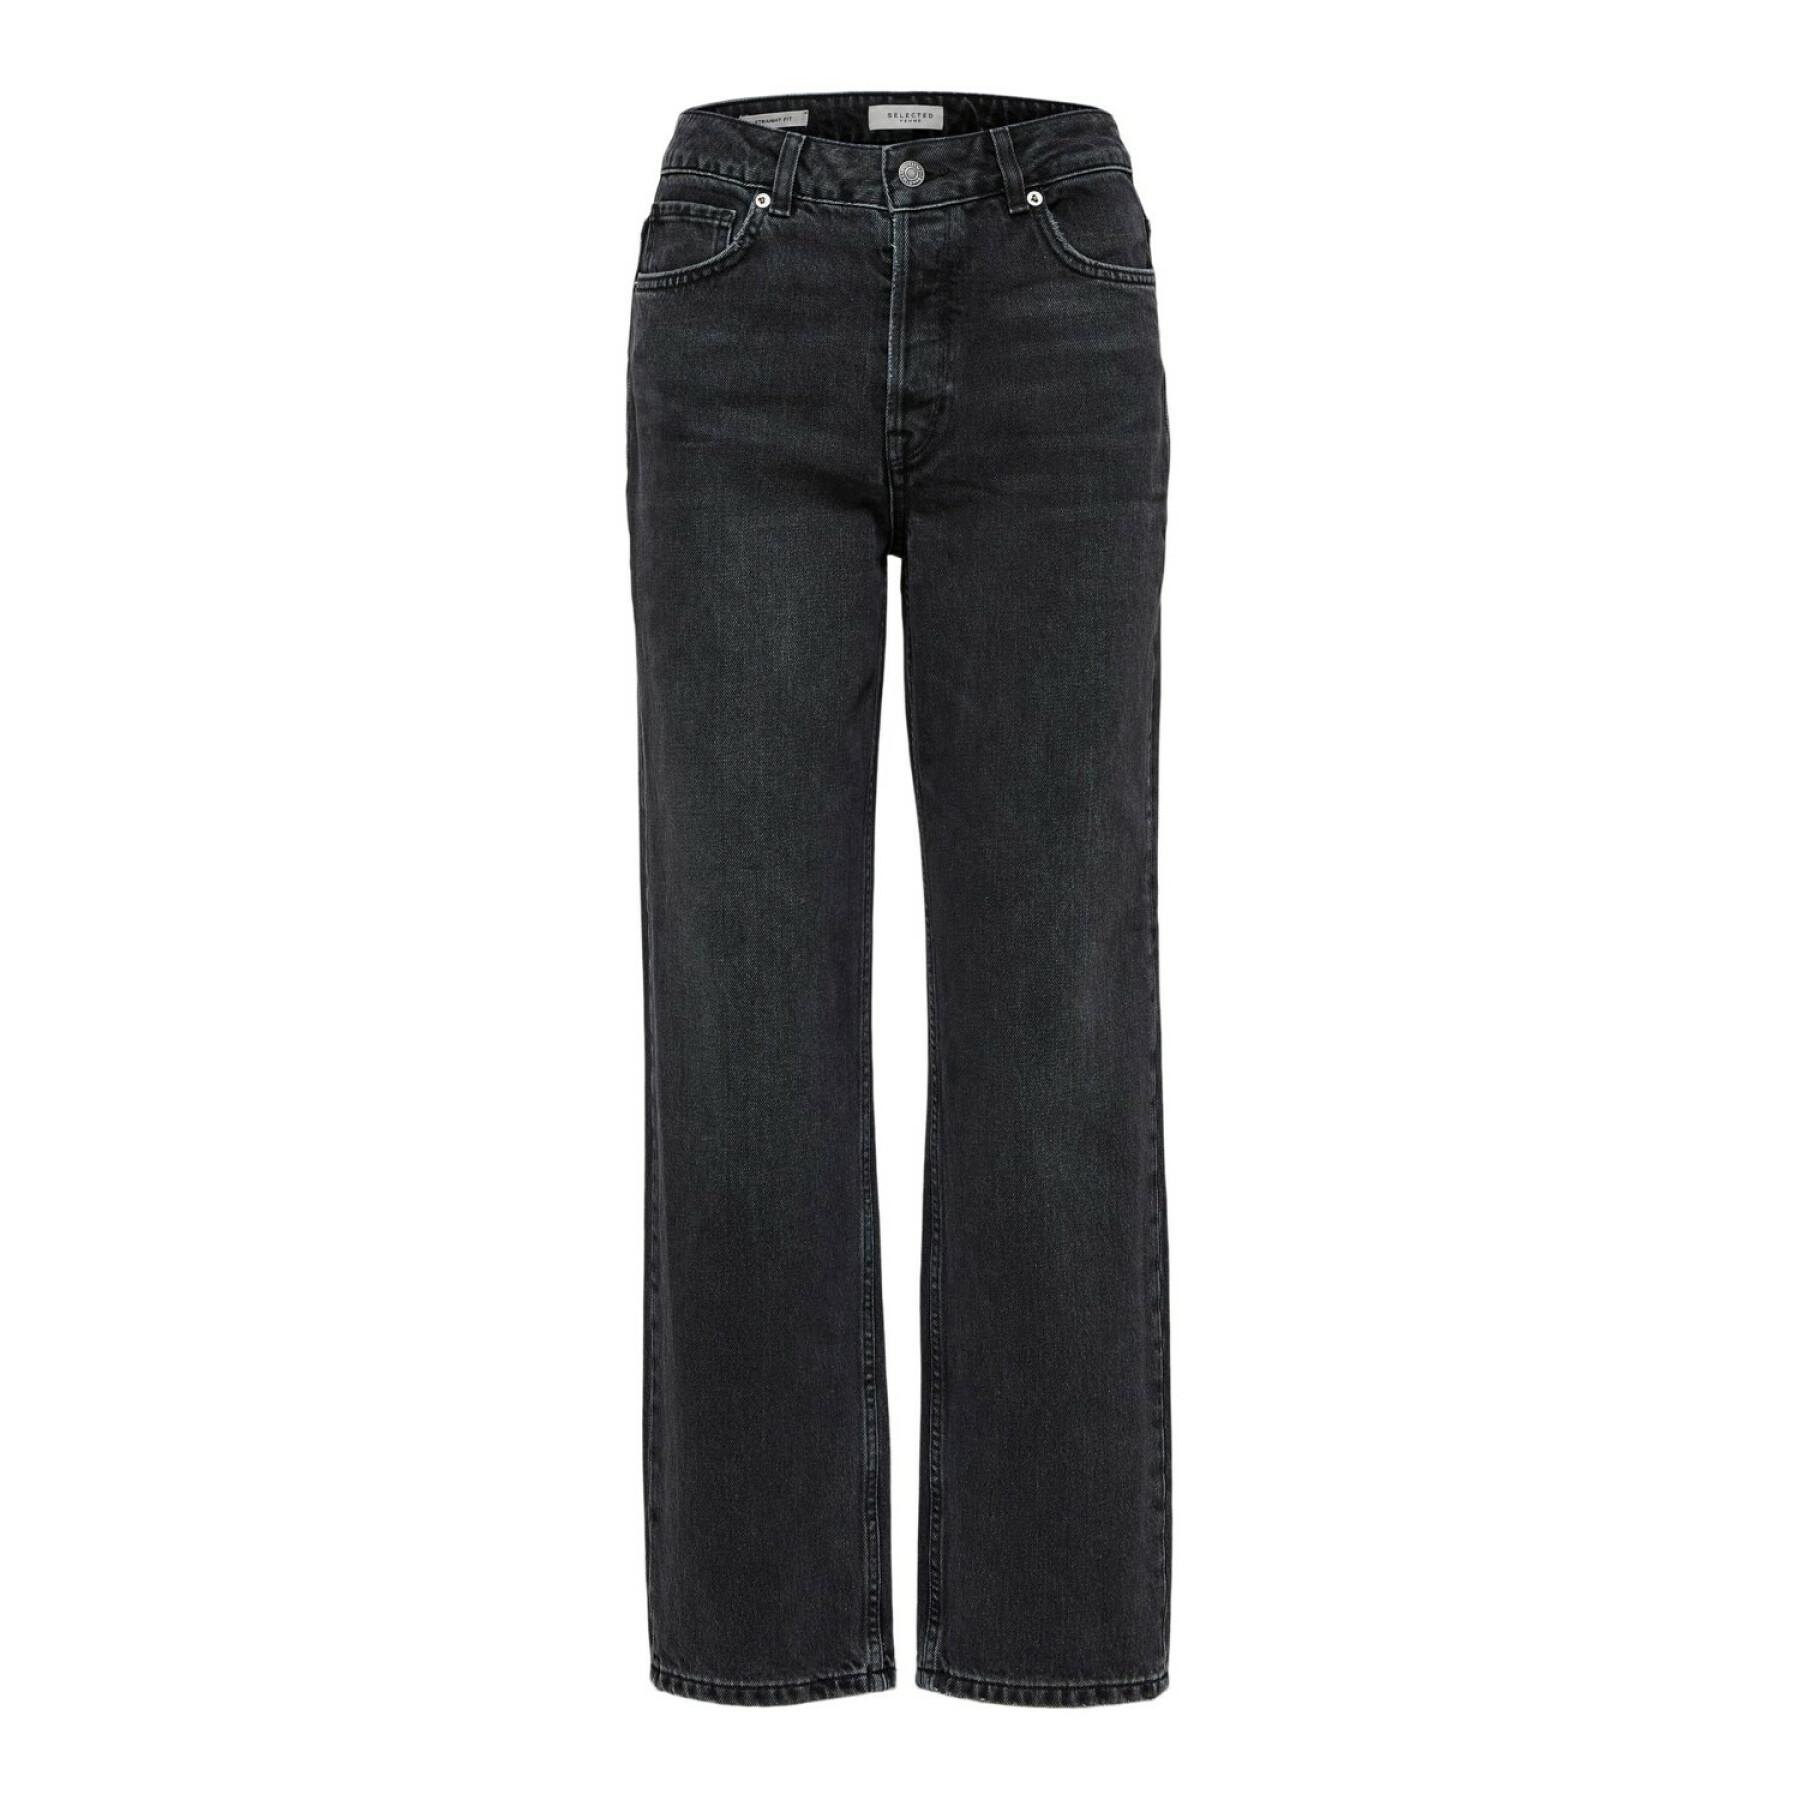 Women's high waist straight jeans Selected Kate